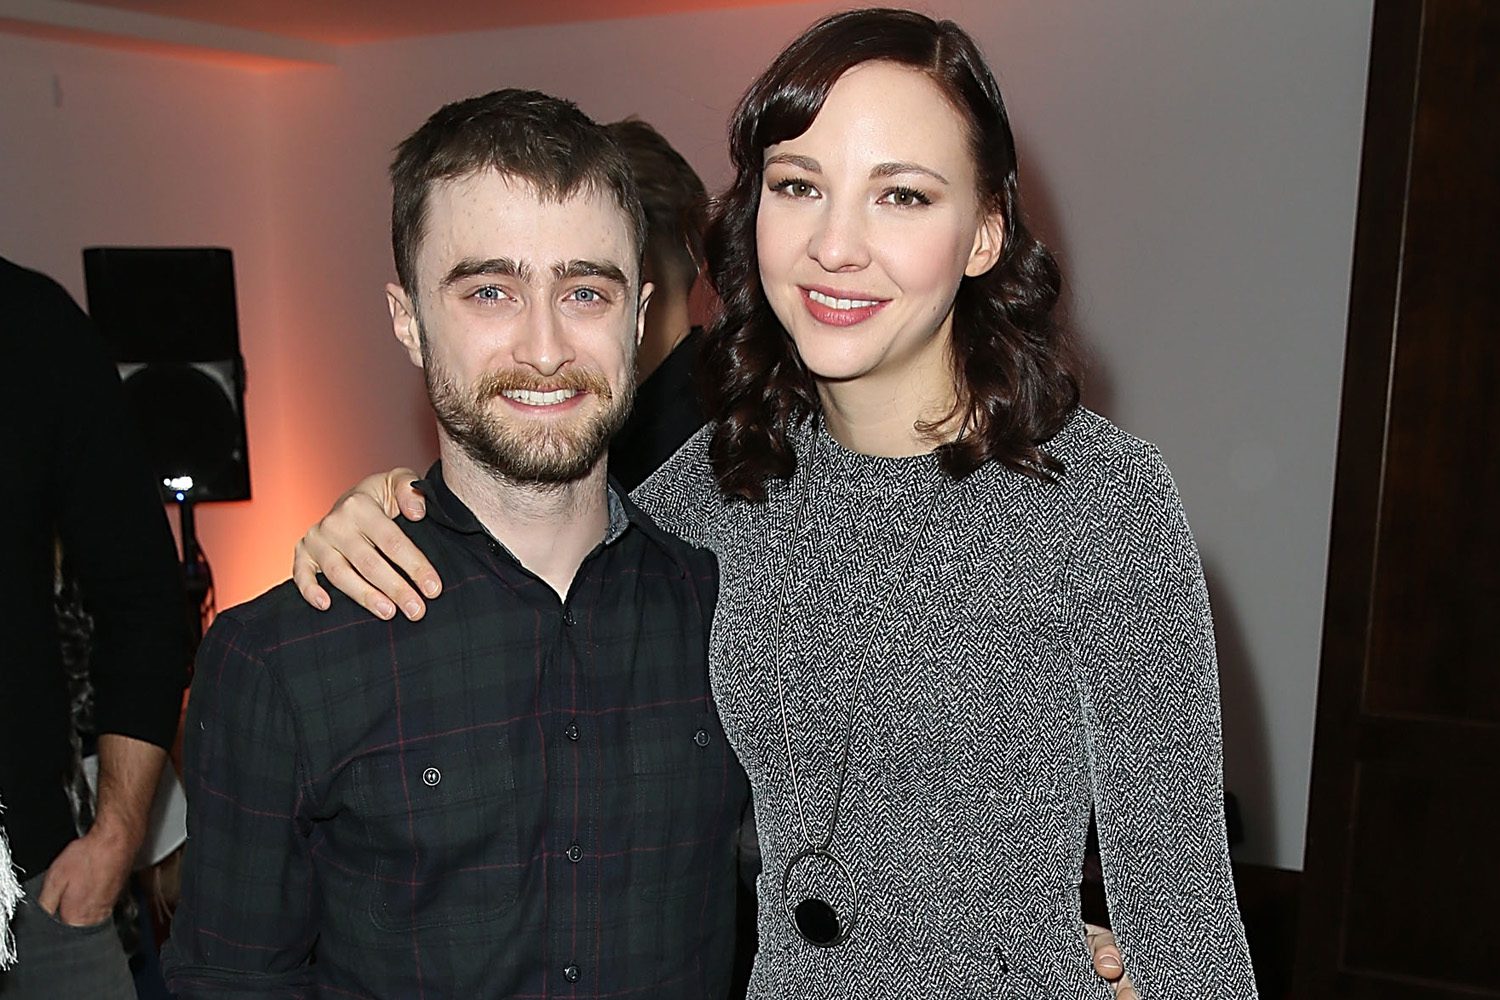 Who is Daniel Radcliffe dating?